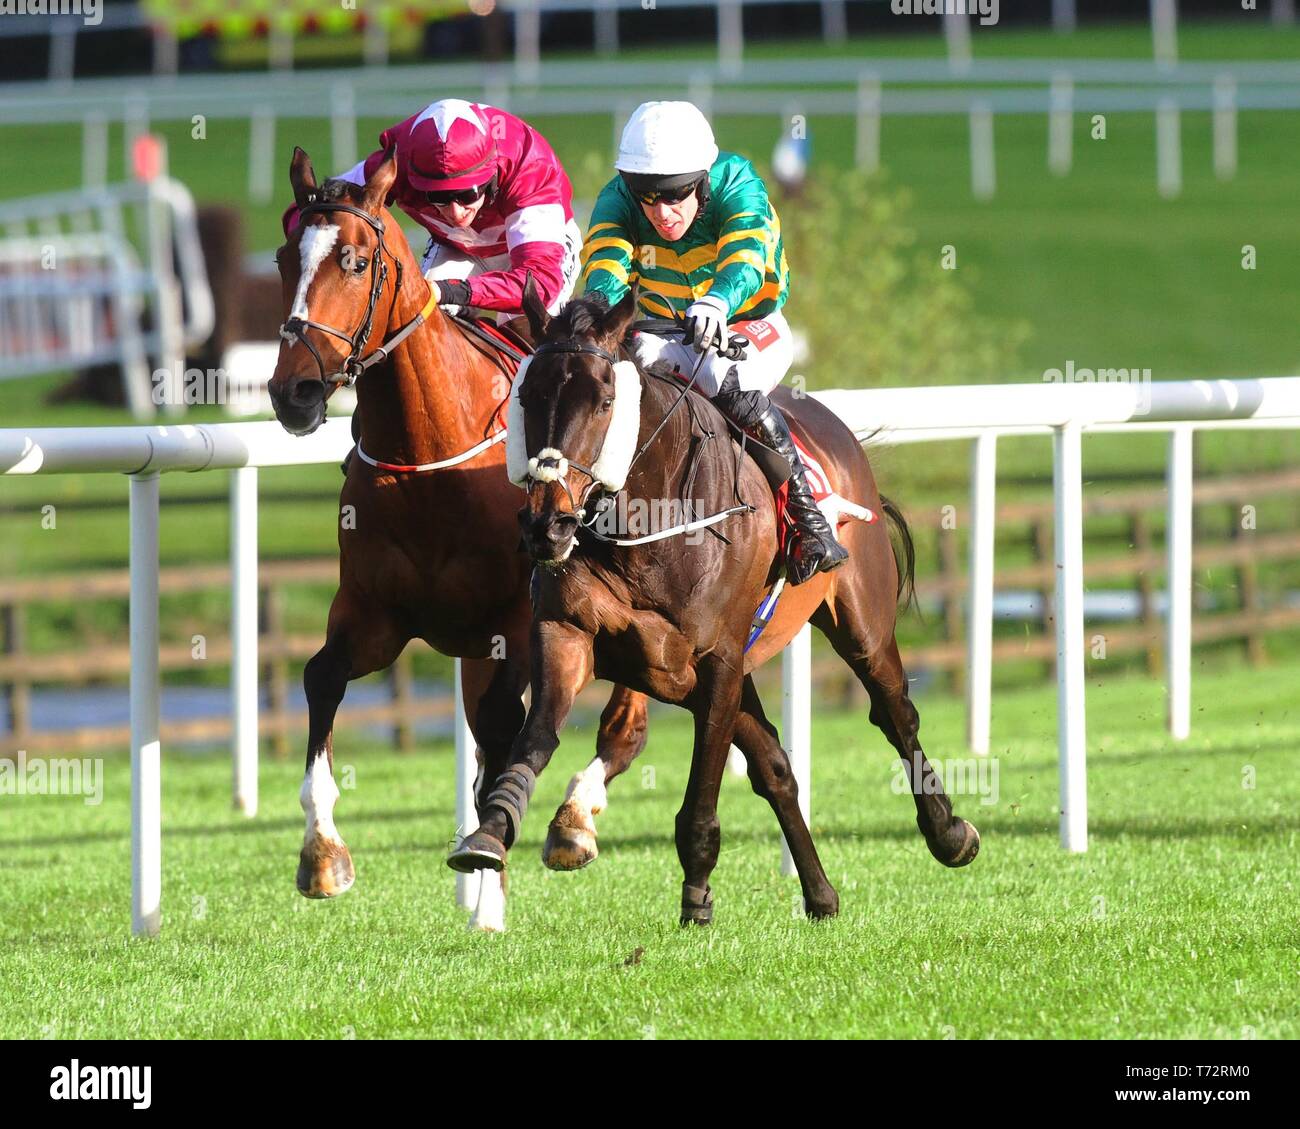 Gardens Of Babylon and Derek O'Connor (right) win the Salessense International Novice Hurdle during day four of the Punchestown Festival at Punchestown Racecourse, County Kildare, Ireland. Stock Photo